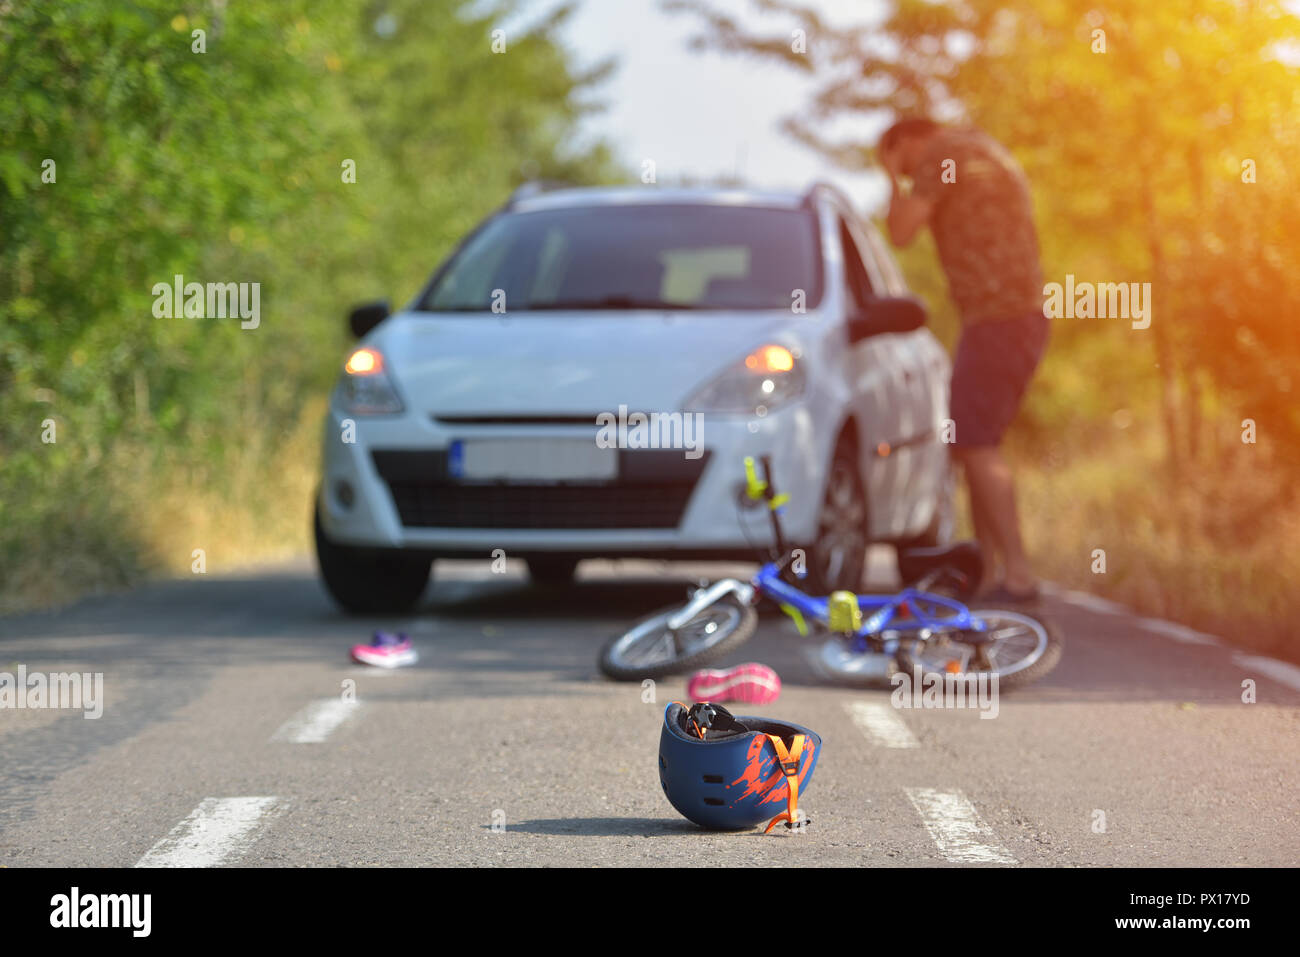 Close-up of a bicycling helmet fallen on the asphalt next to a bicycle after car accident on the street in the city Stock Photo